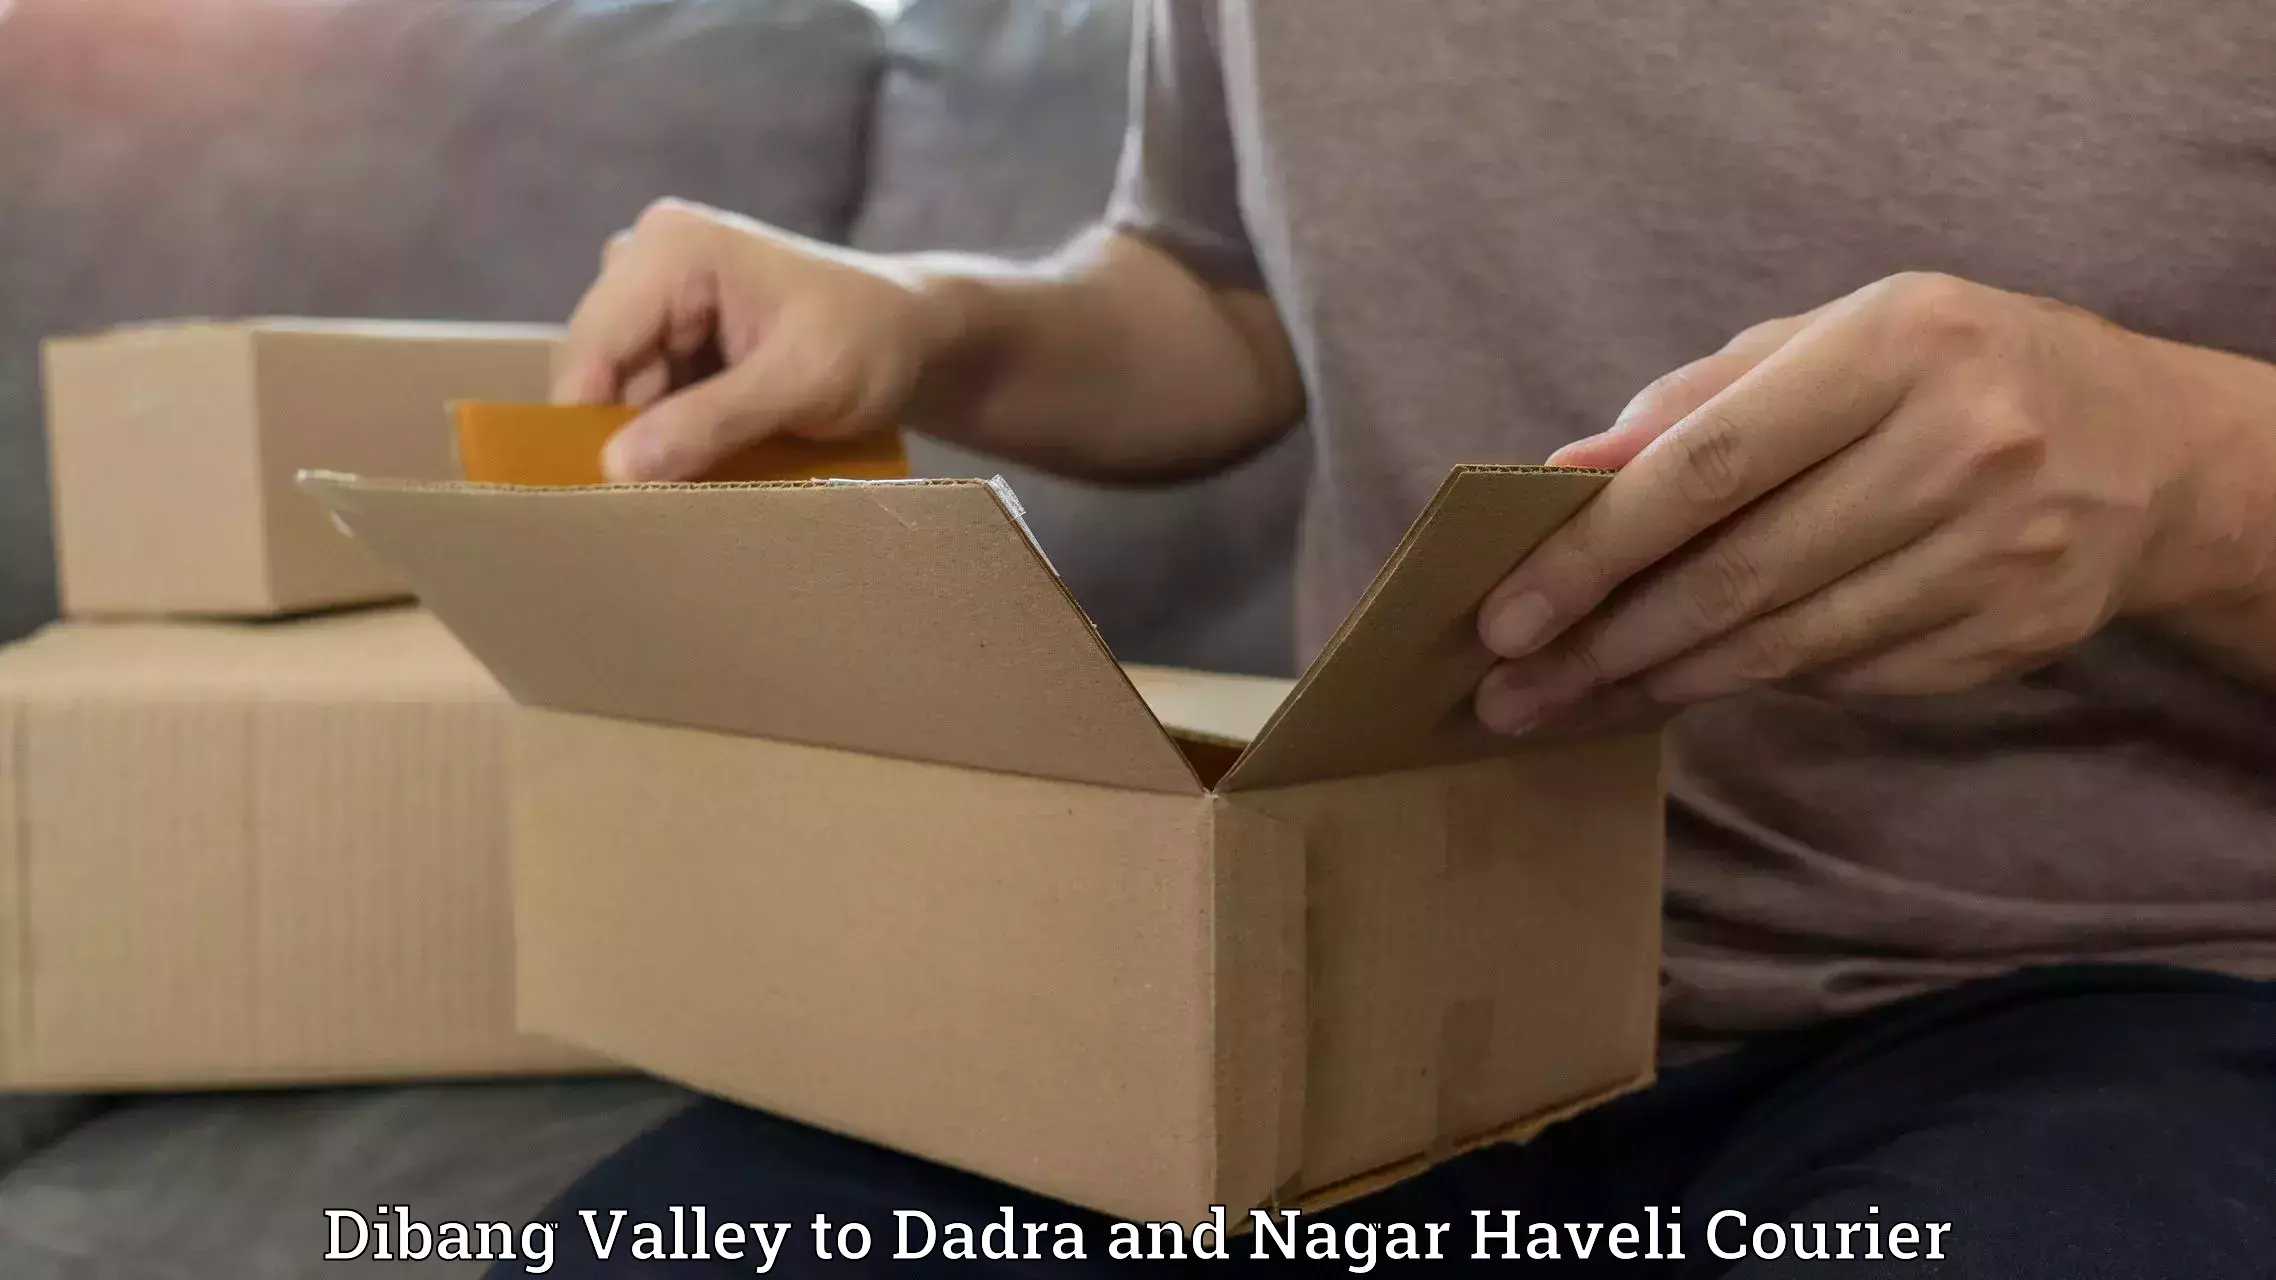 Reliable parcel services in Dibang Valley to Dadra and Nagar Haveli